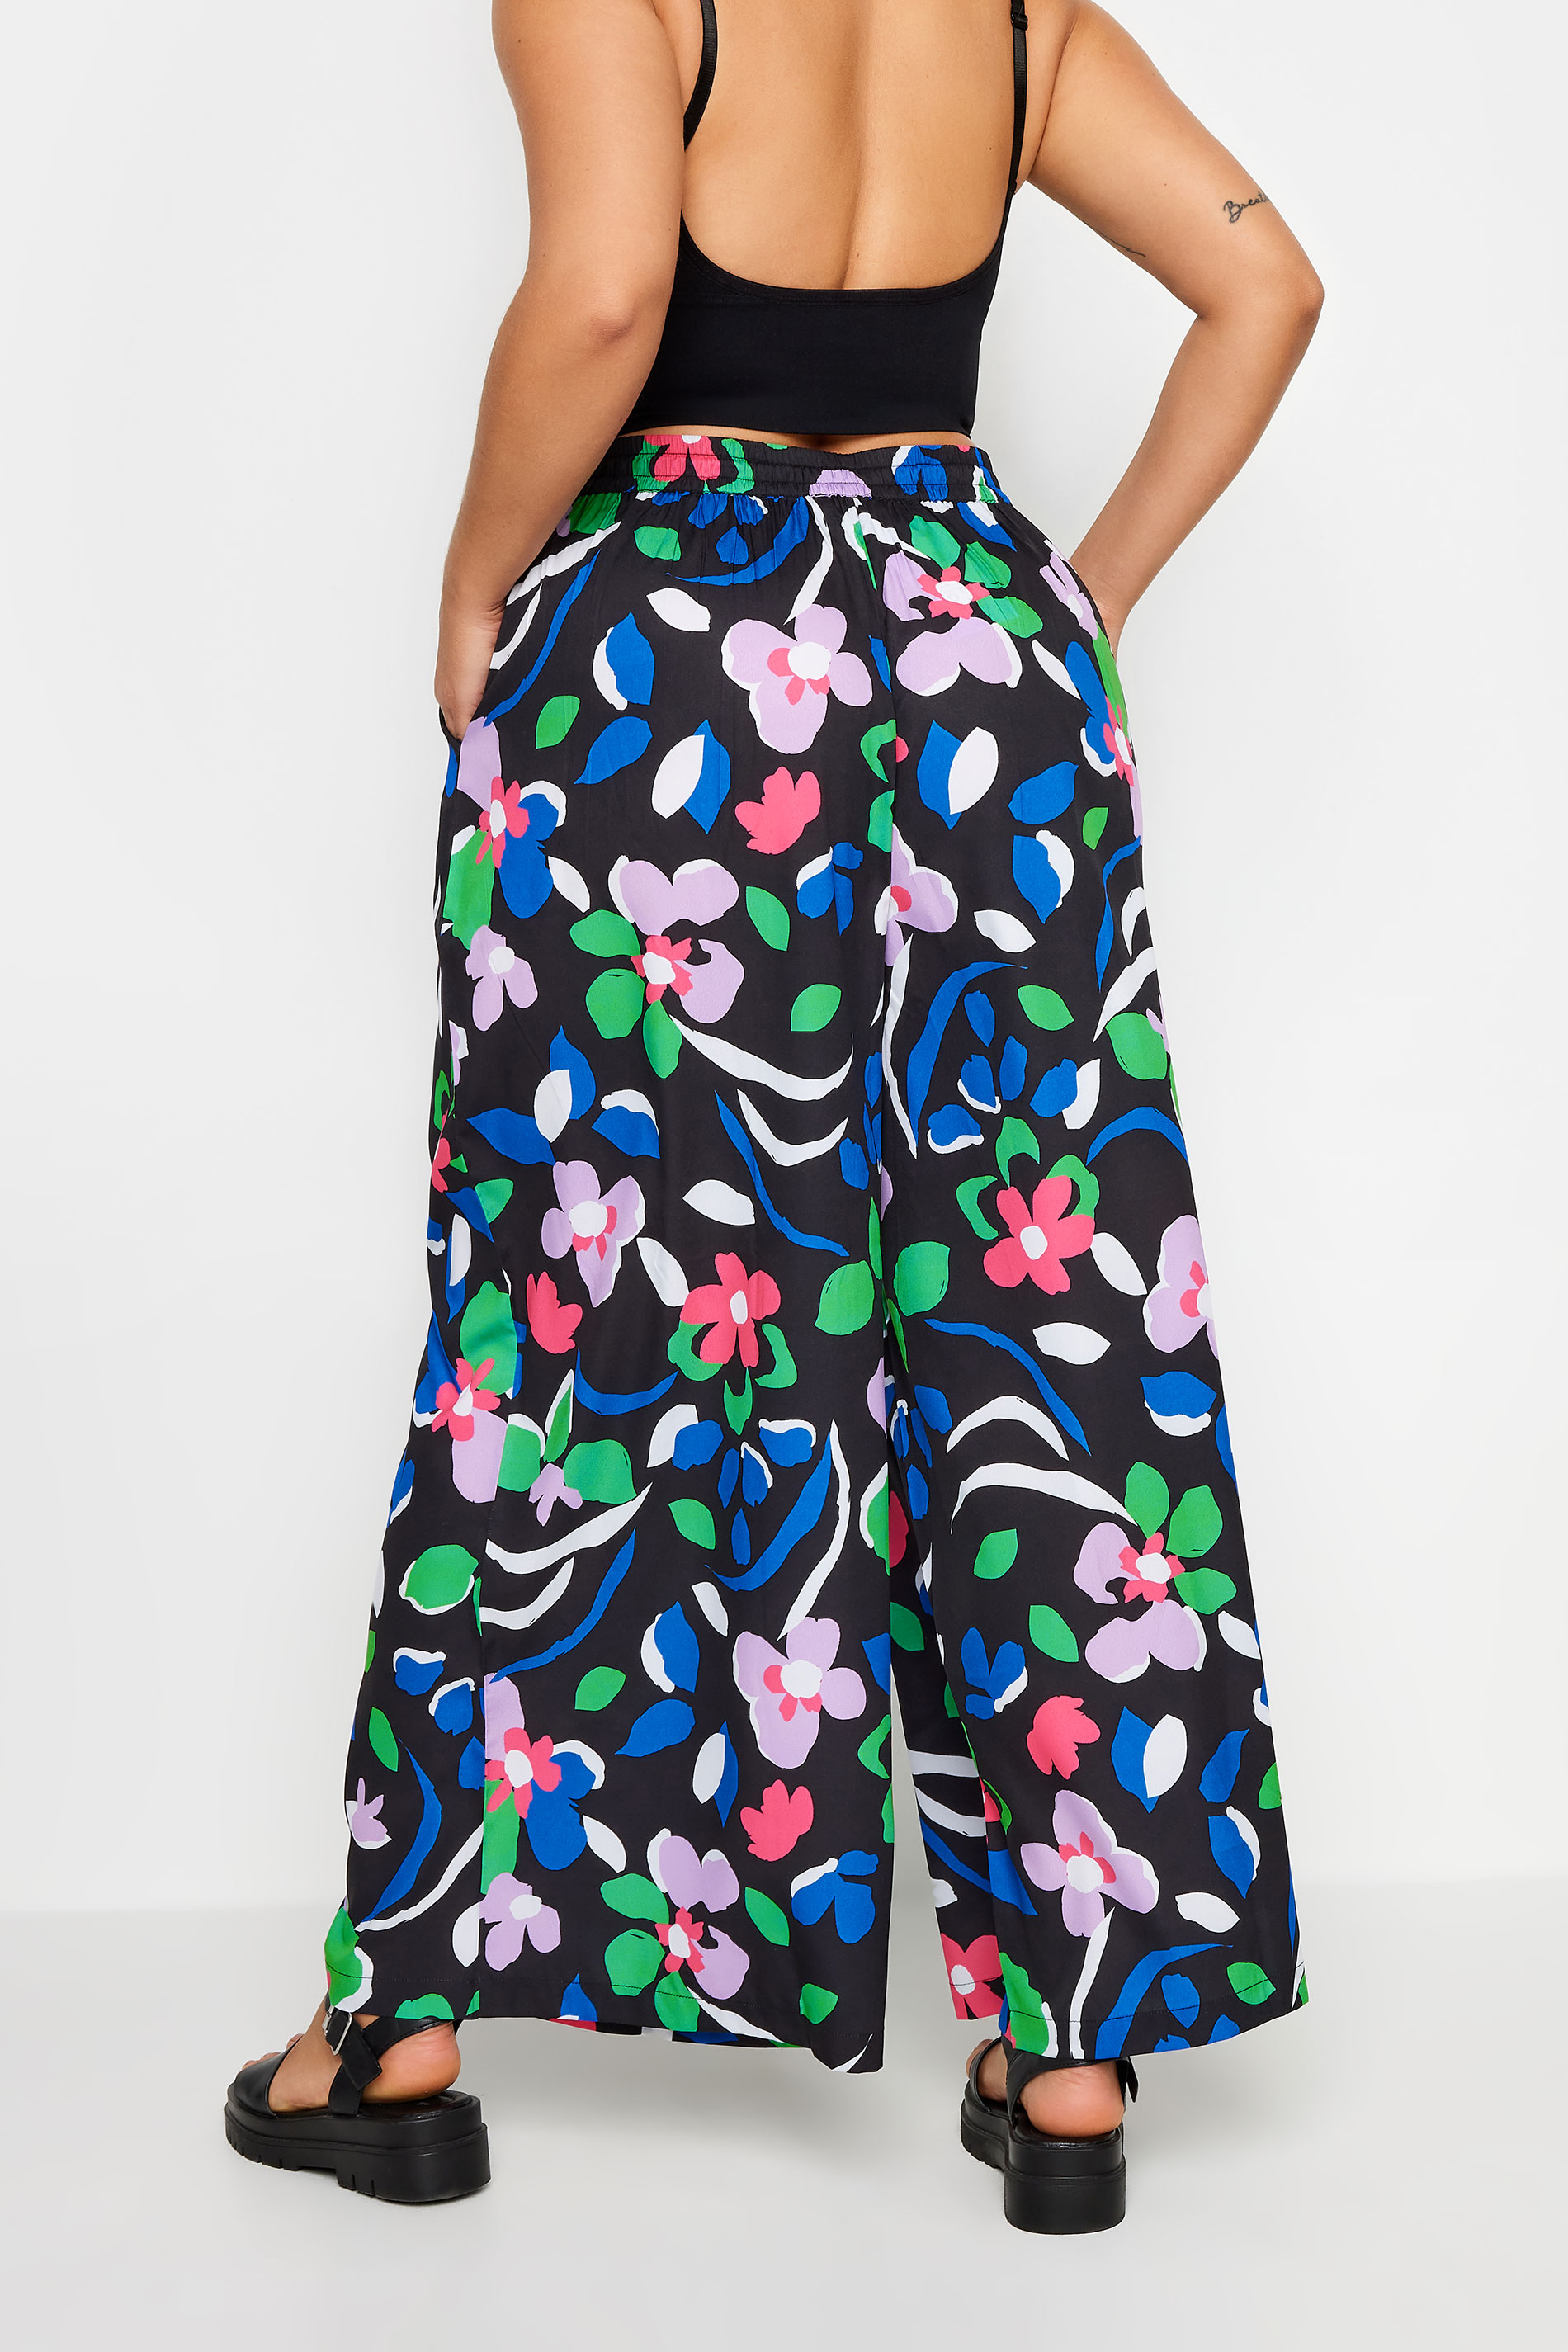 LIMITED COLLECTION Plus Size Black Floral Print Drawstring Wide Leg Trousers | Yours Clothing 3